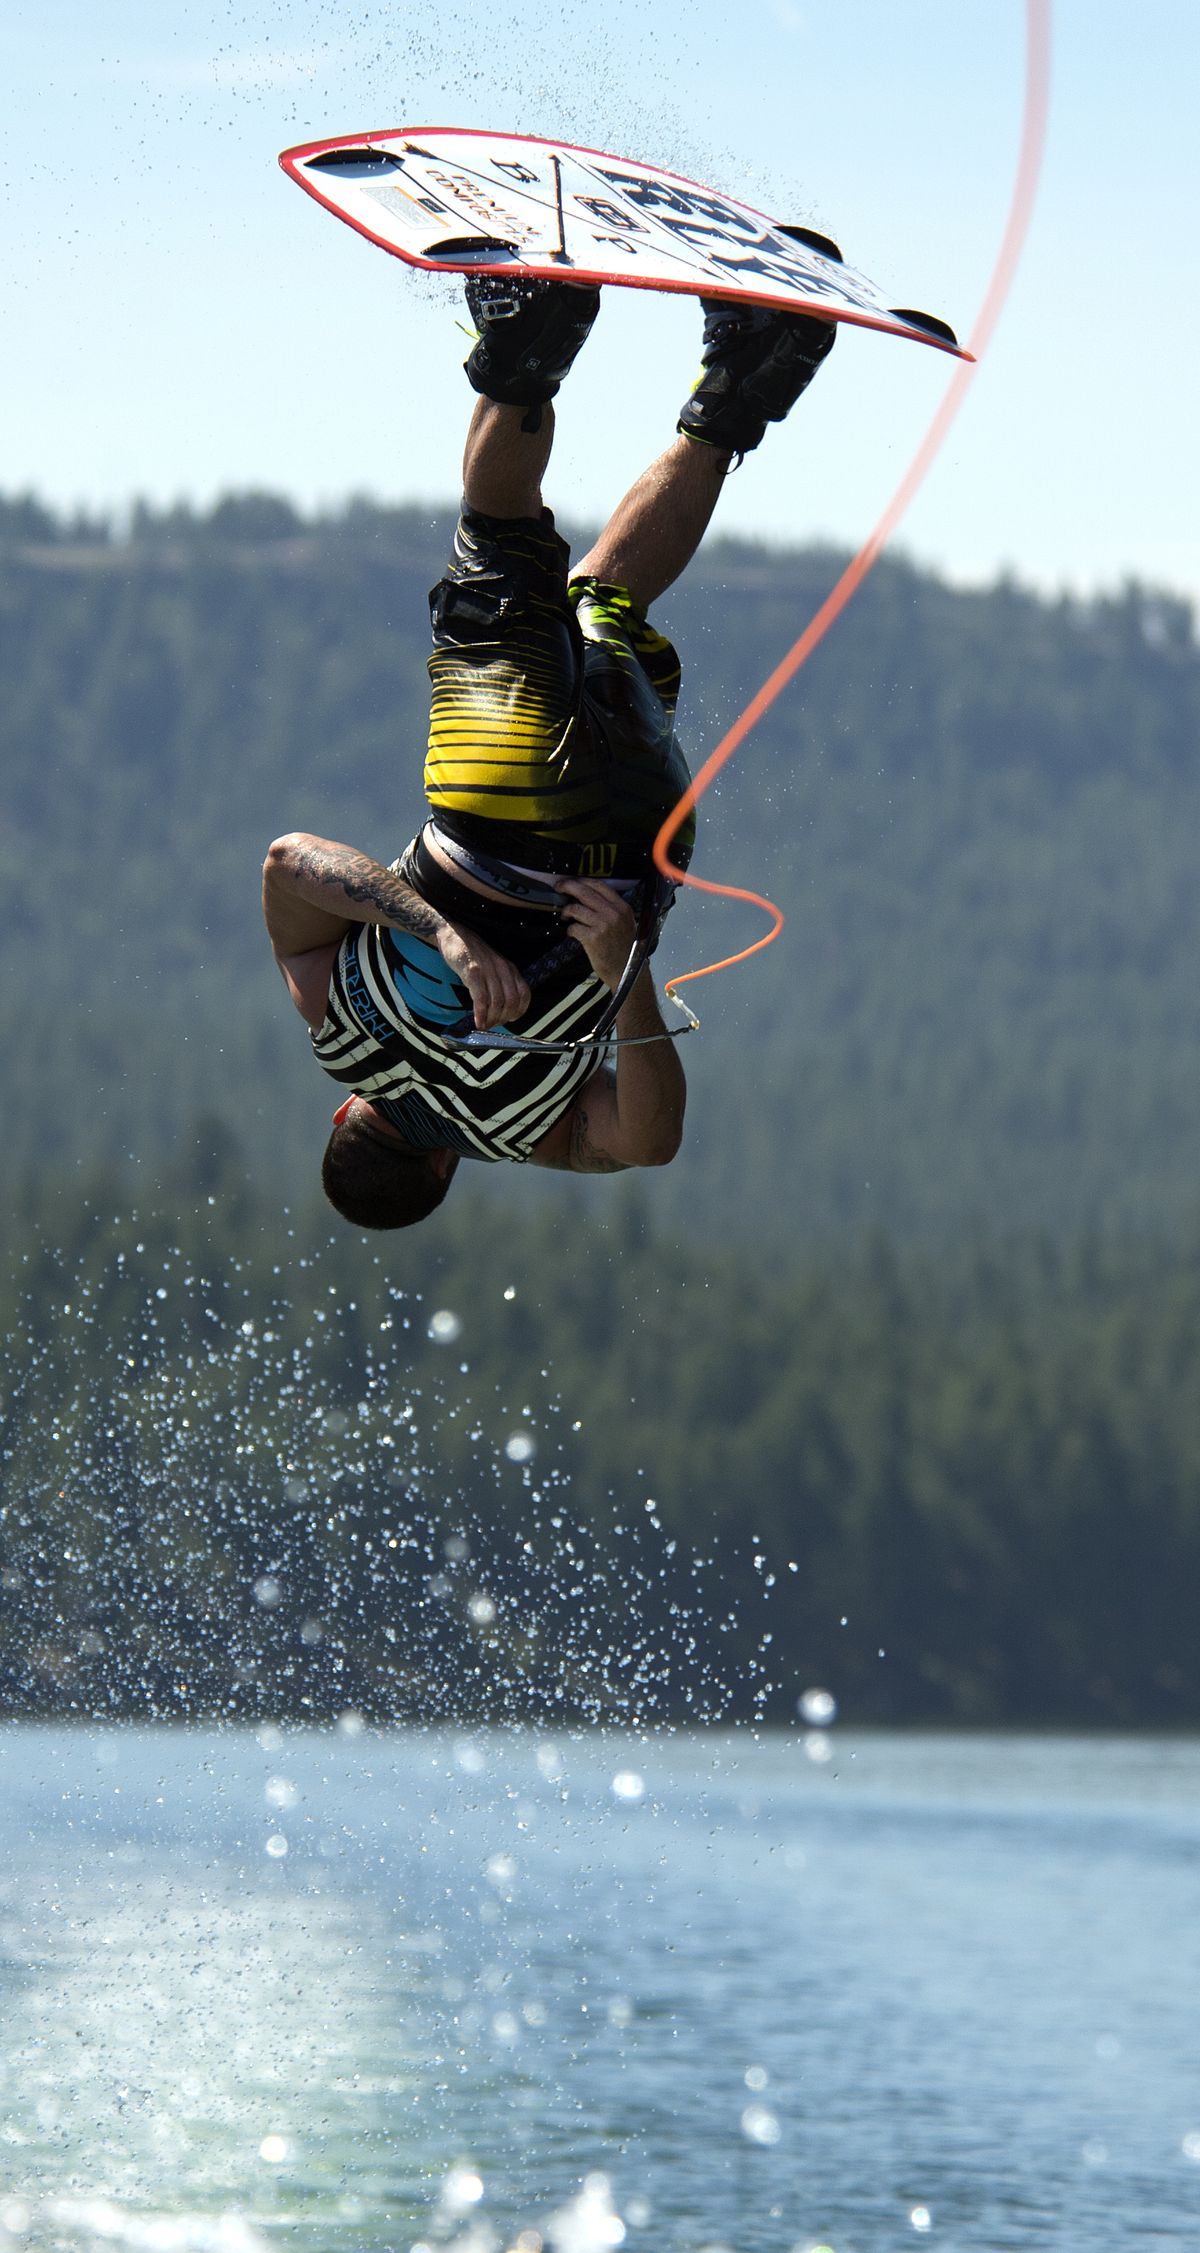 Wakeboarding pro Ricky Krieger, 29, started participating in the sport at age 16 and turned pro at 21. (DAN PELLE photos)